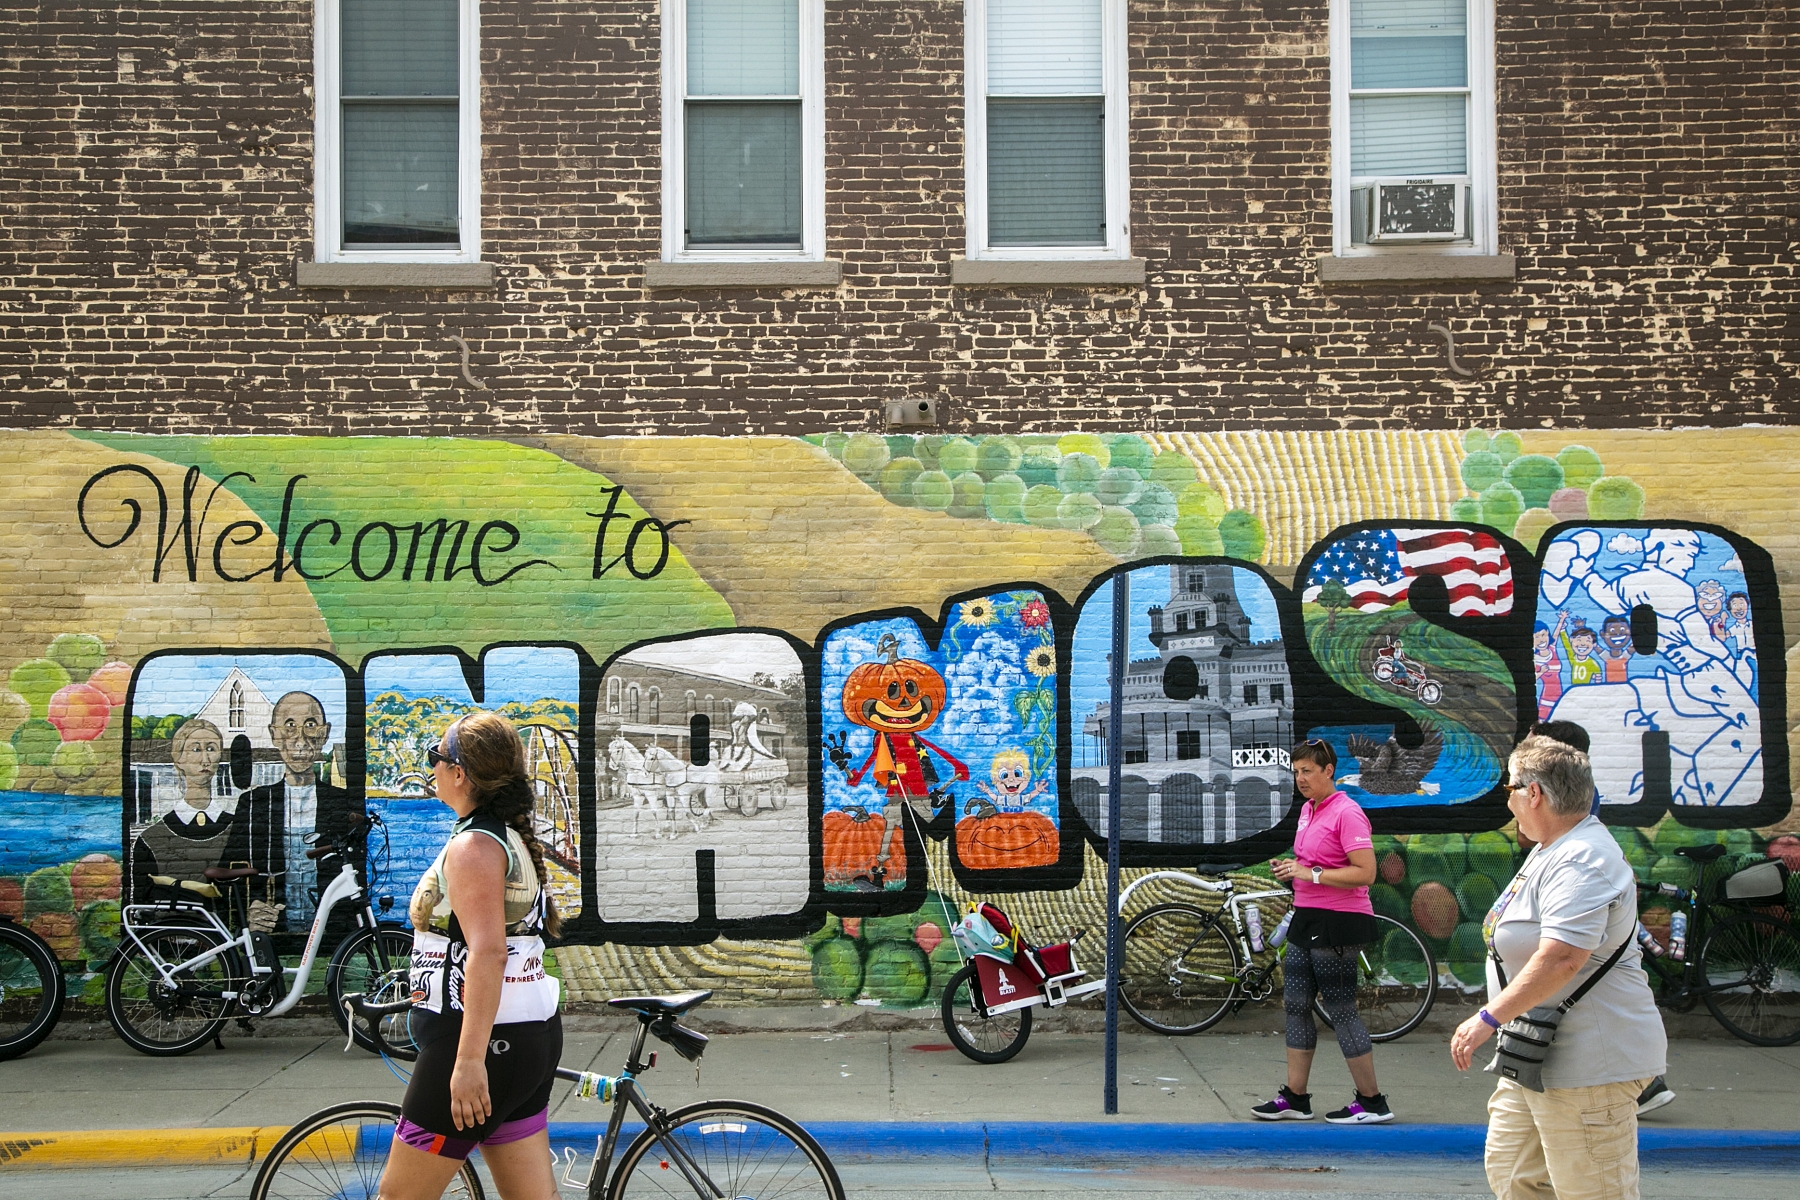 People pose for photos in front of a mural on Day 5 during RAGBRAI, Thursday, July 29, 2021, in Anamosa, Iowa.